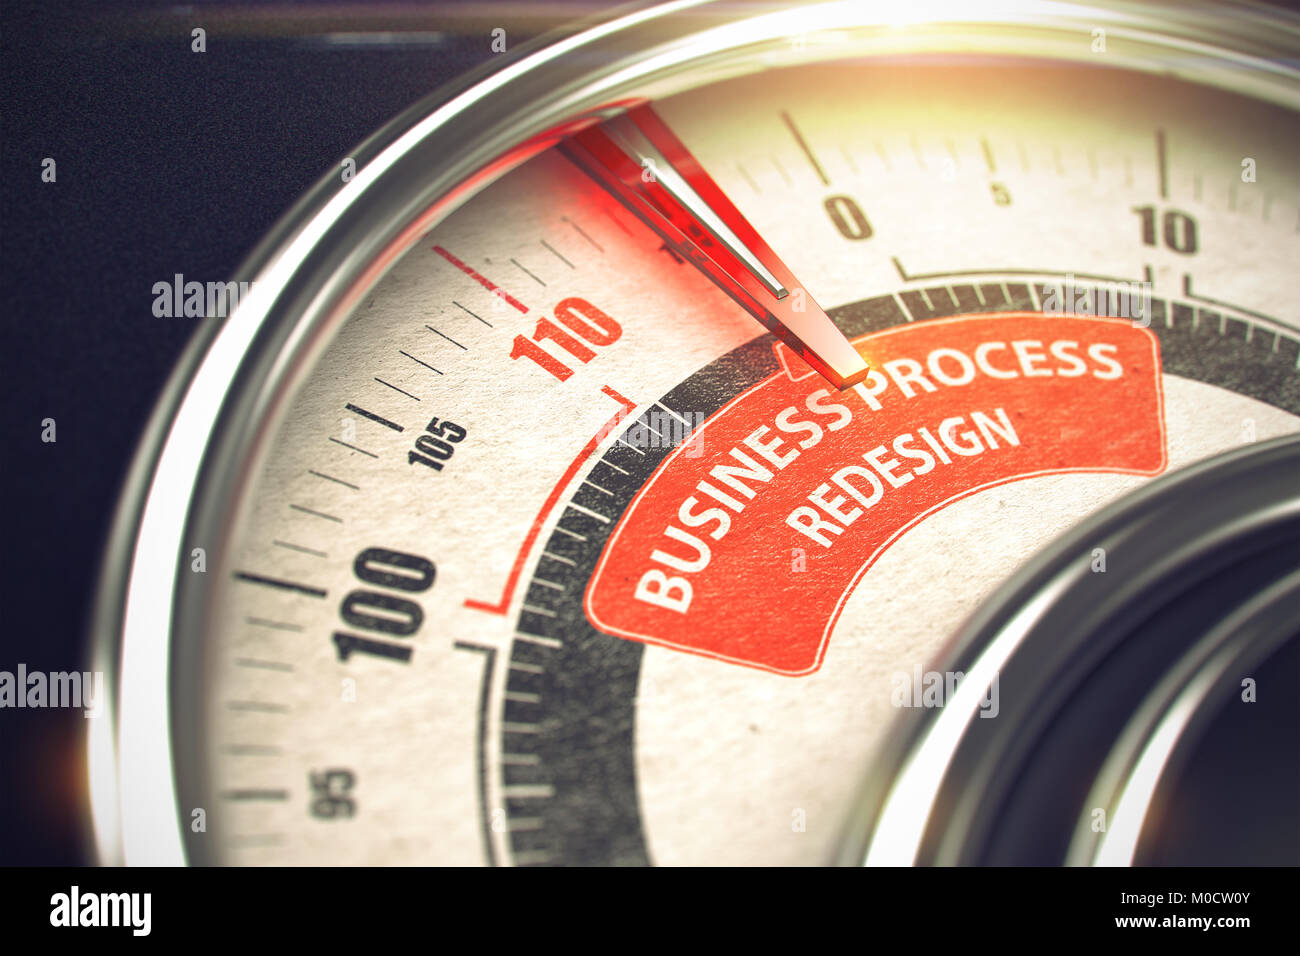 Business Process Redesign. 3D. Stockfoto